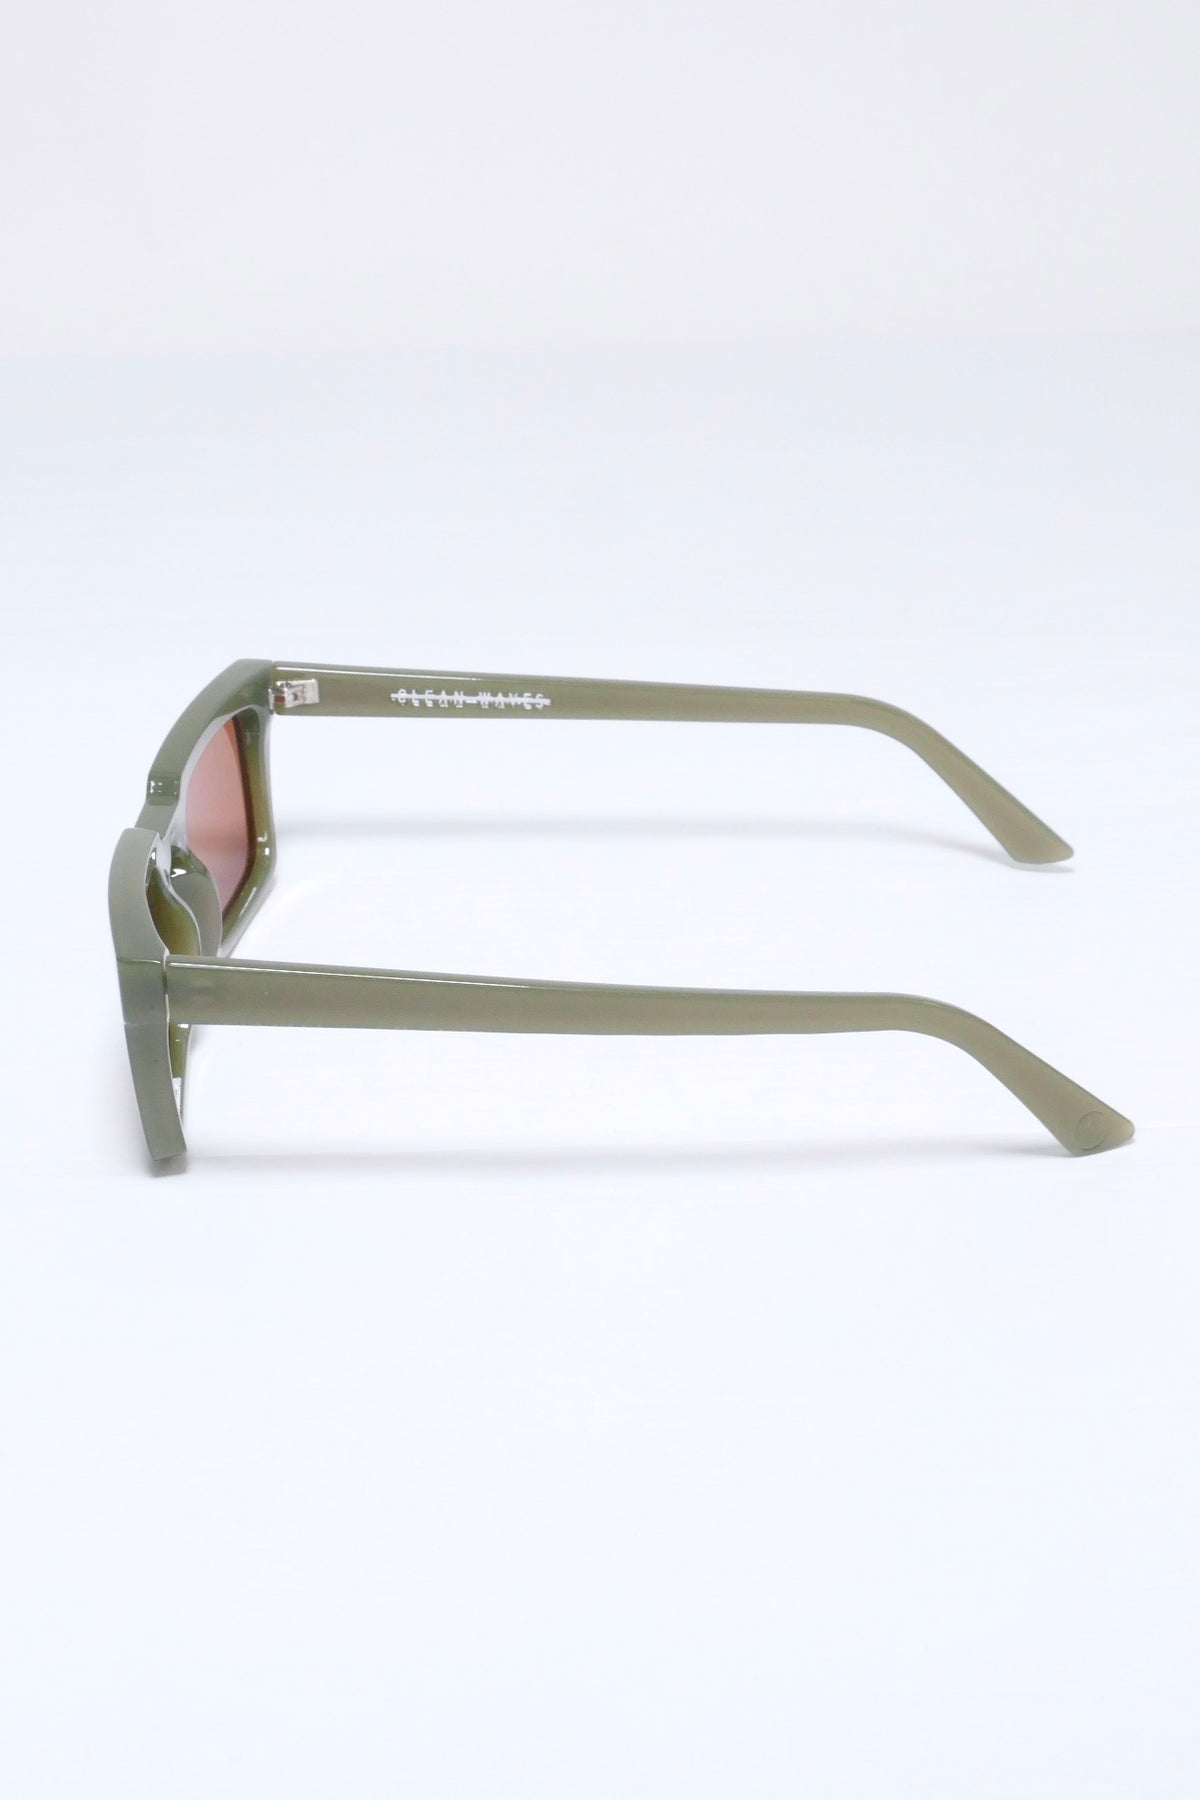 Clean Waves Type 02 Low Sunglasses - Green/Brown